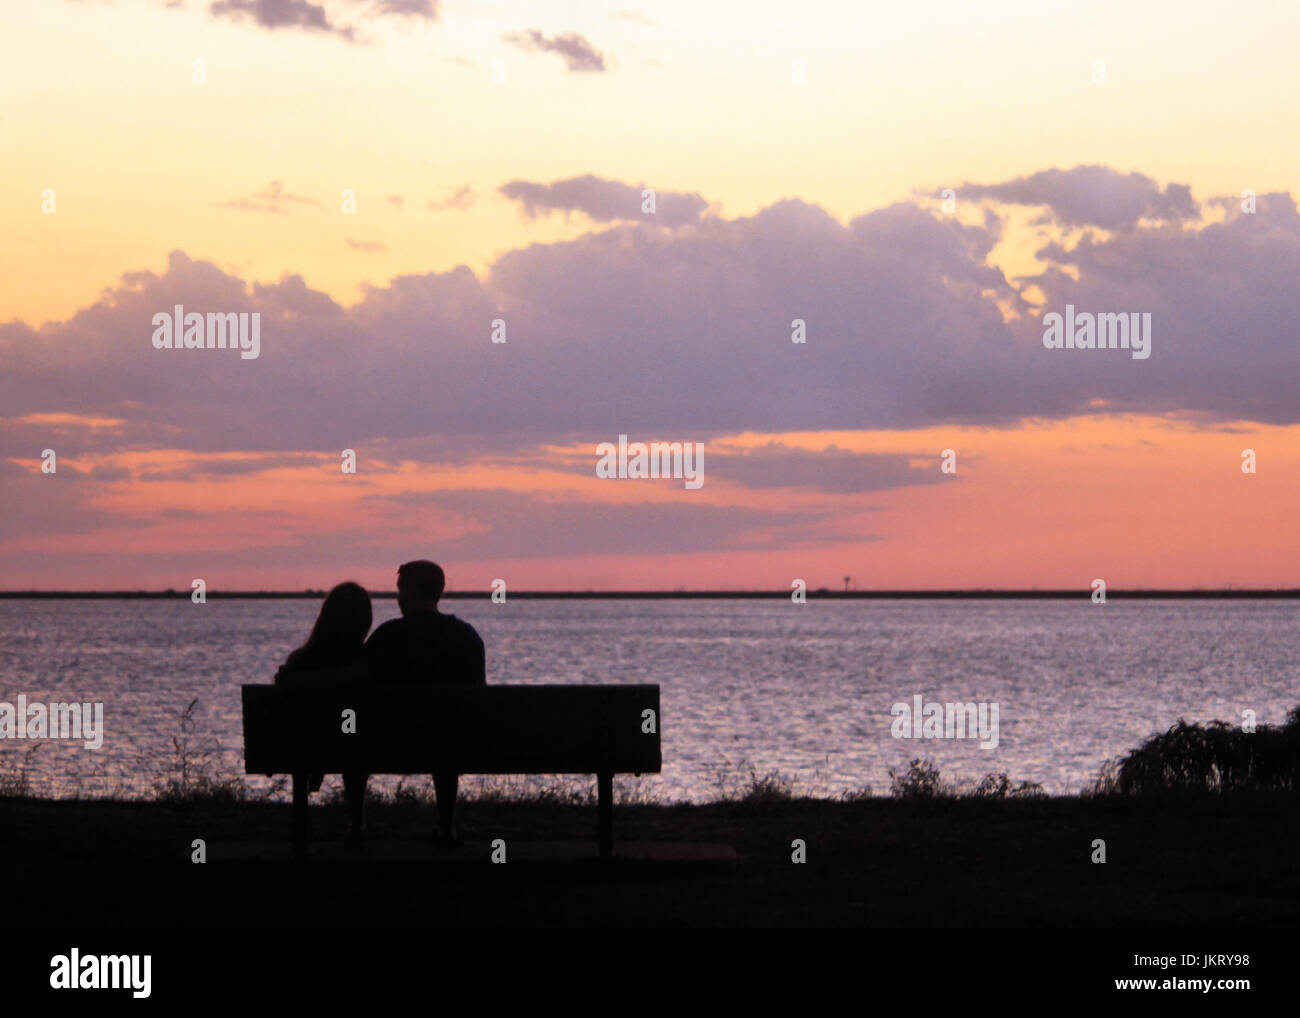 A couple sitting on a bench at a lake are silhouetted in the evening sunset. Stock Photo